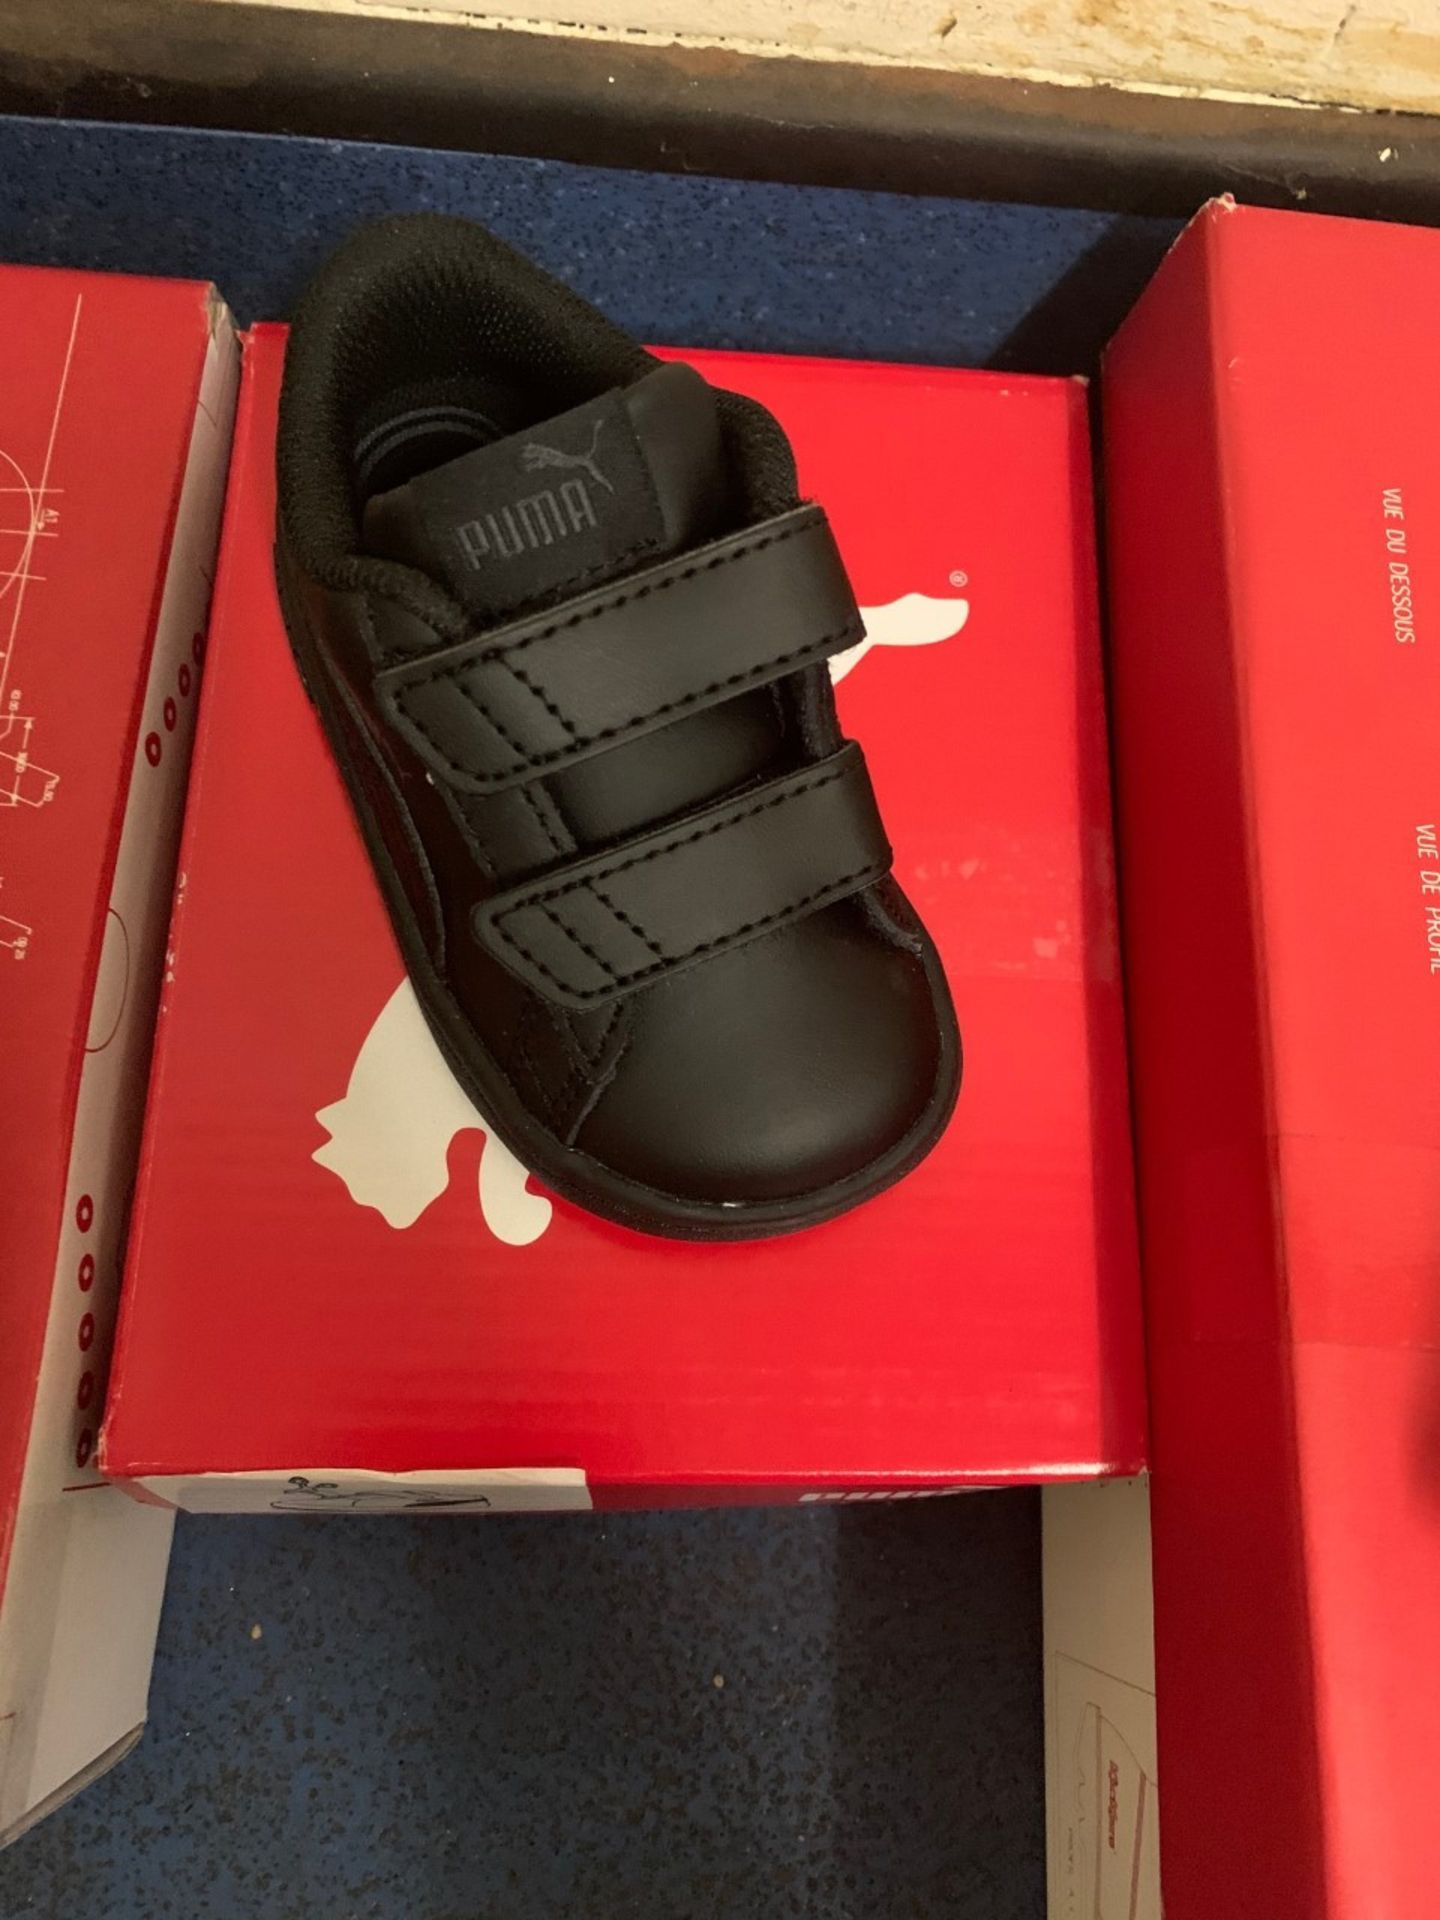 NEW & BOXED PUMA BLACK TRAINER SIZE INFANT 4 (294/21) - Image 2 of 2